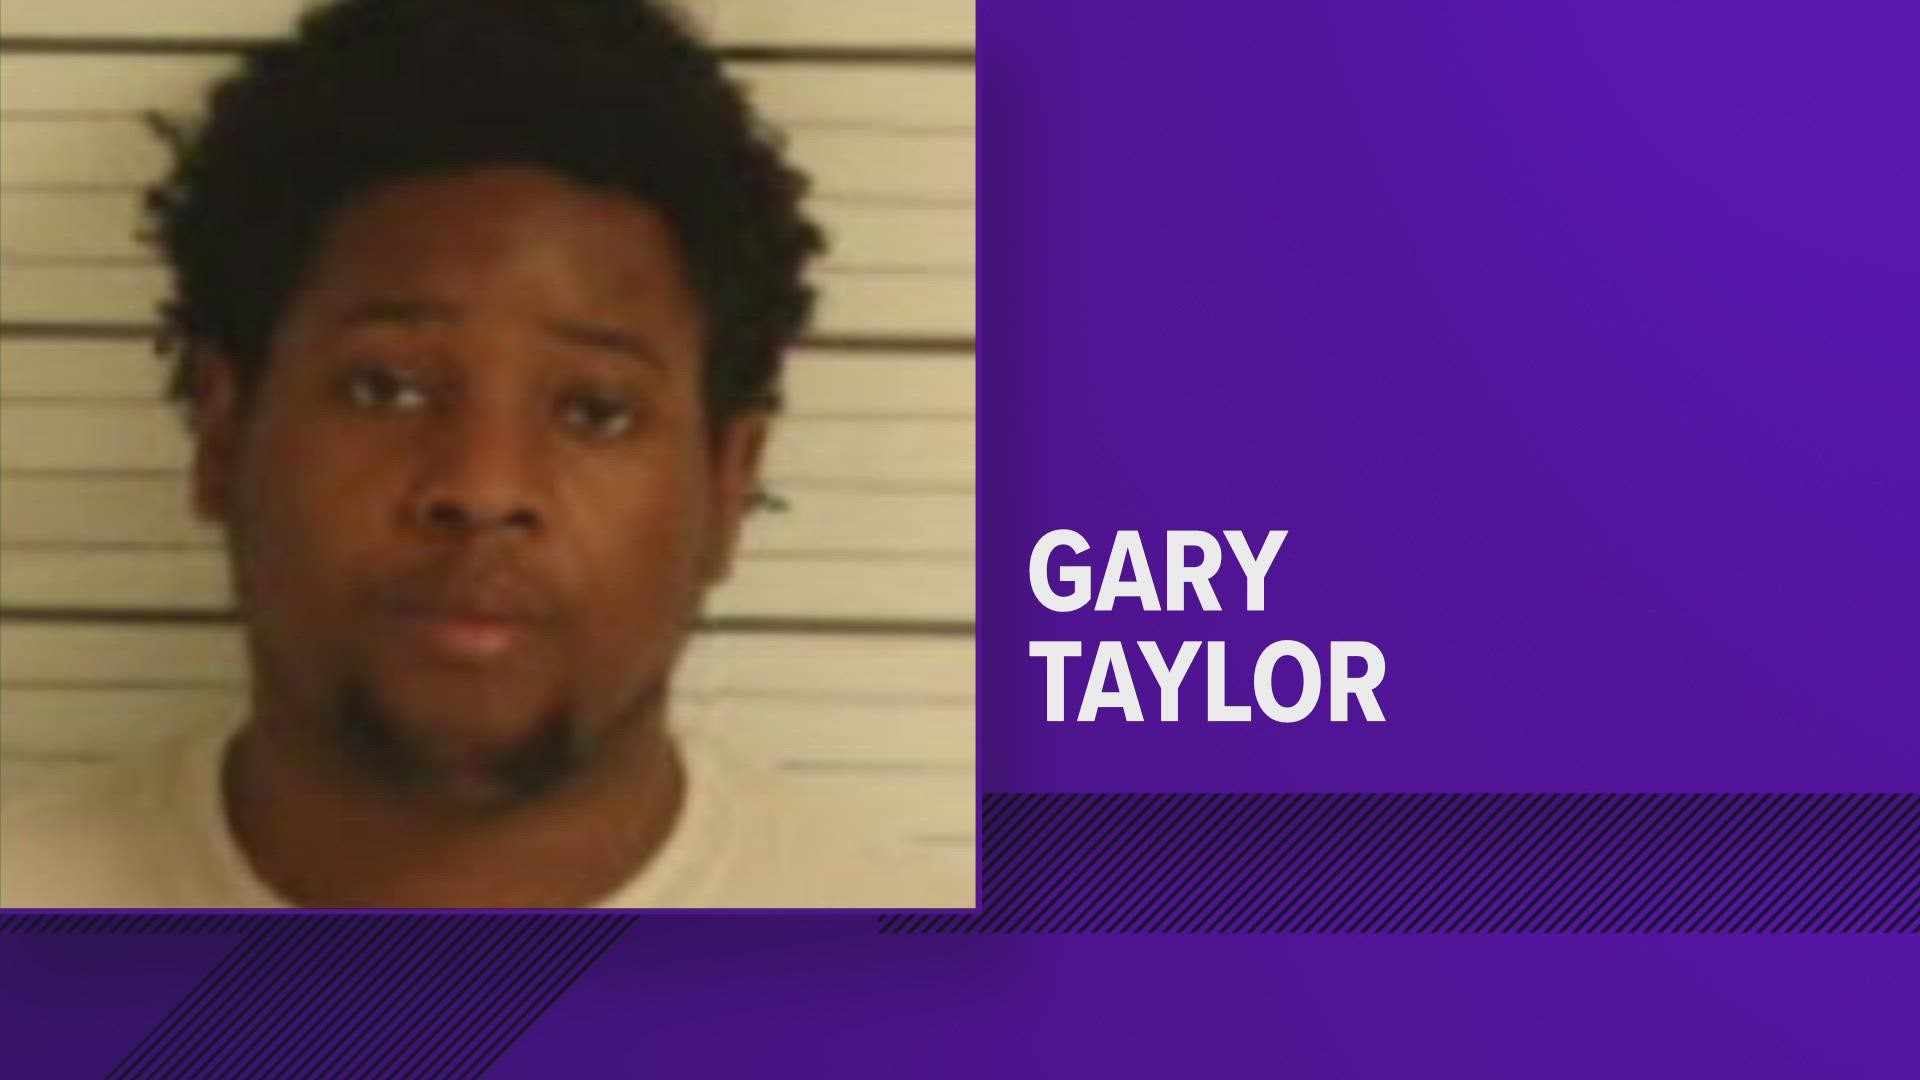 Gary A. Taylor was originally set free on a first-degree murder charge Dec. 31, according to court documents.